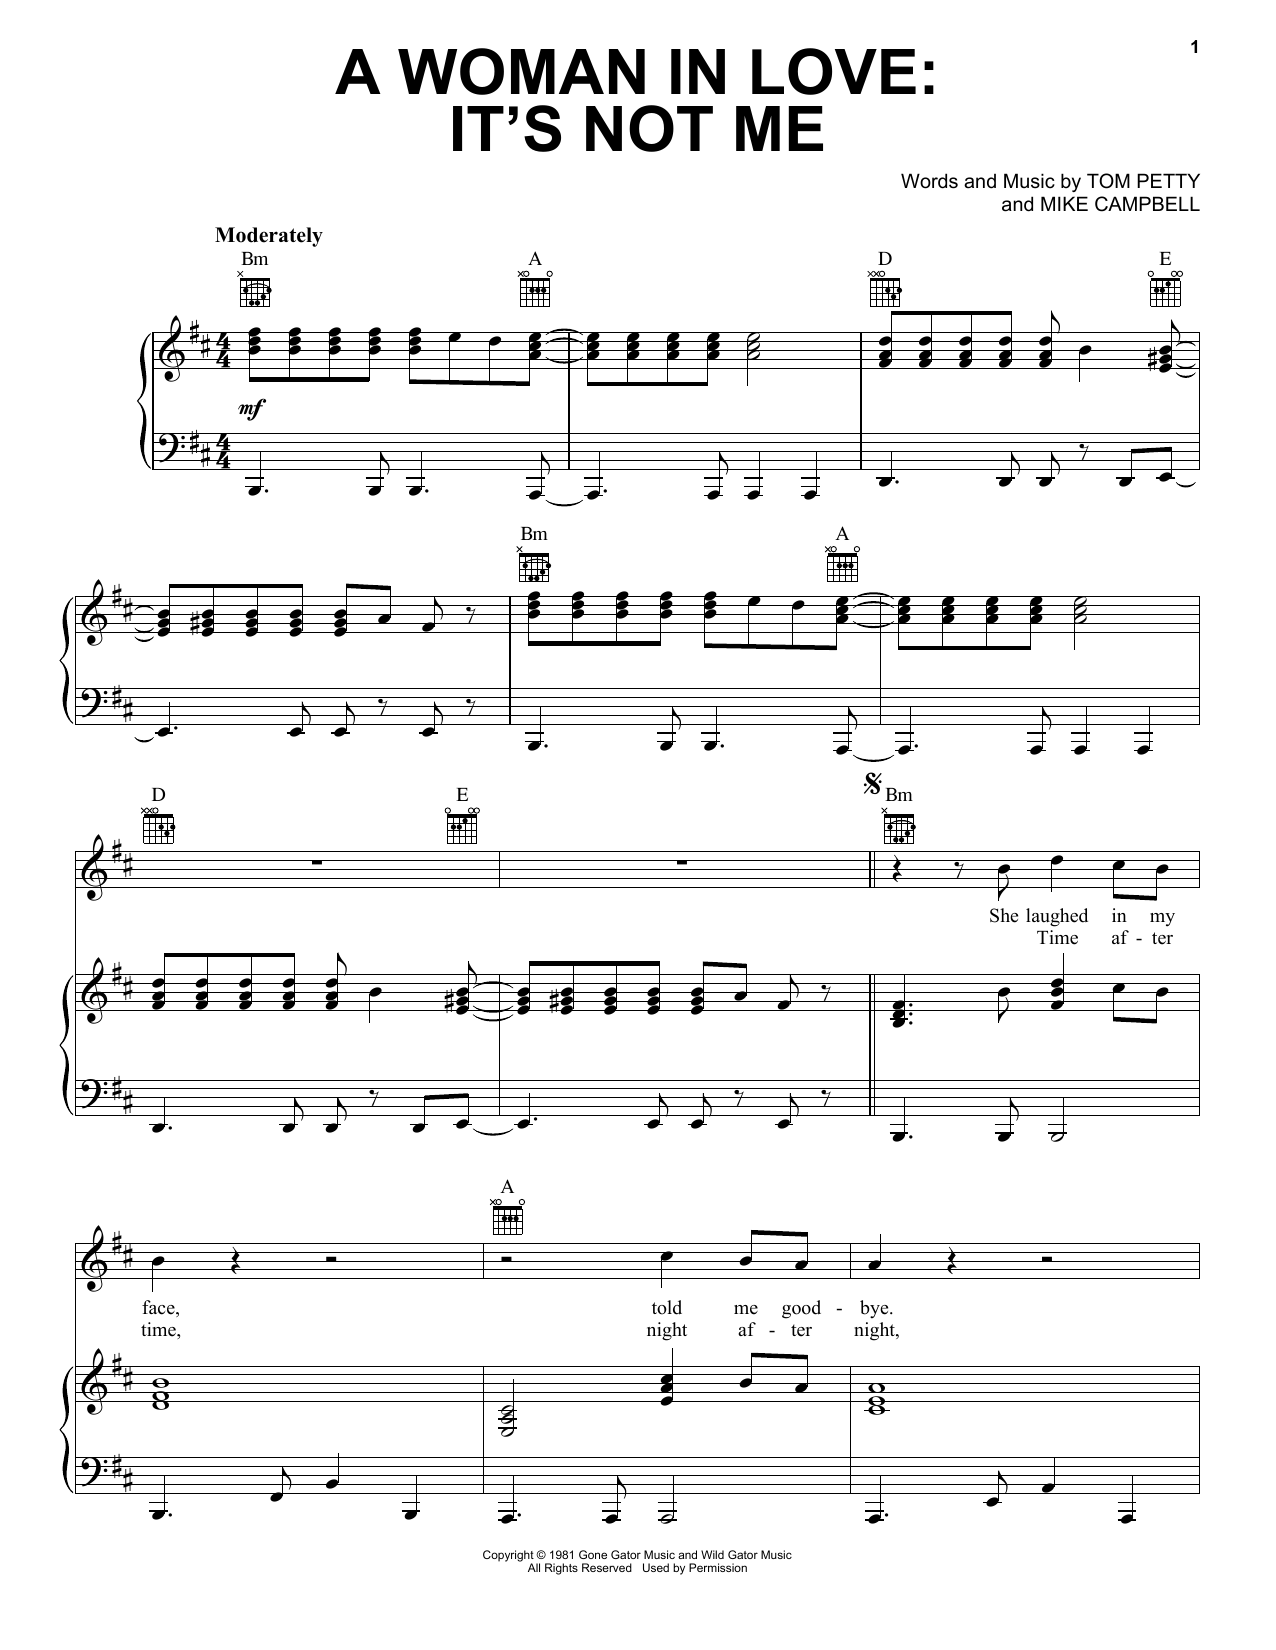 Download Tom Petty A Woman In Love: It's Not Me Sheet Music